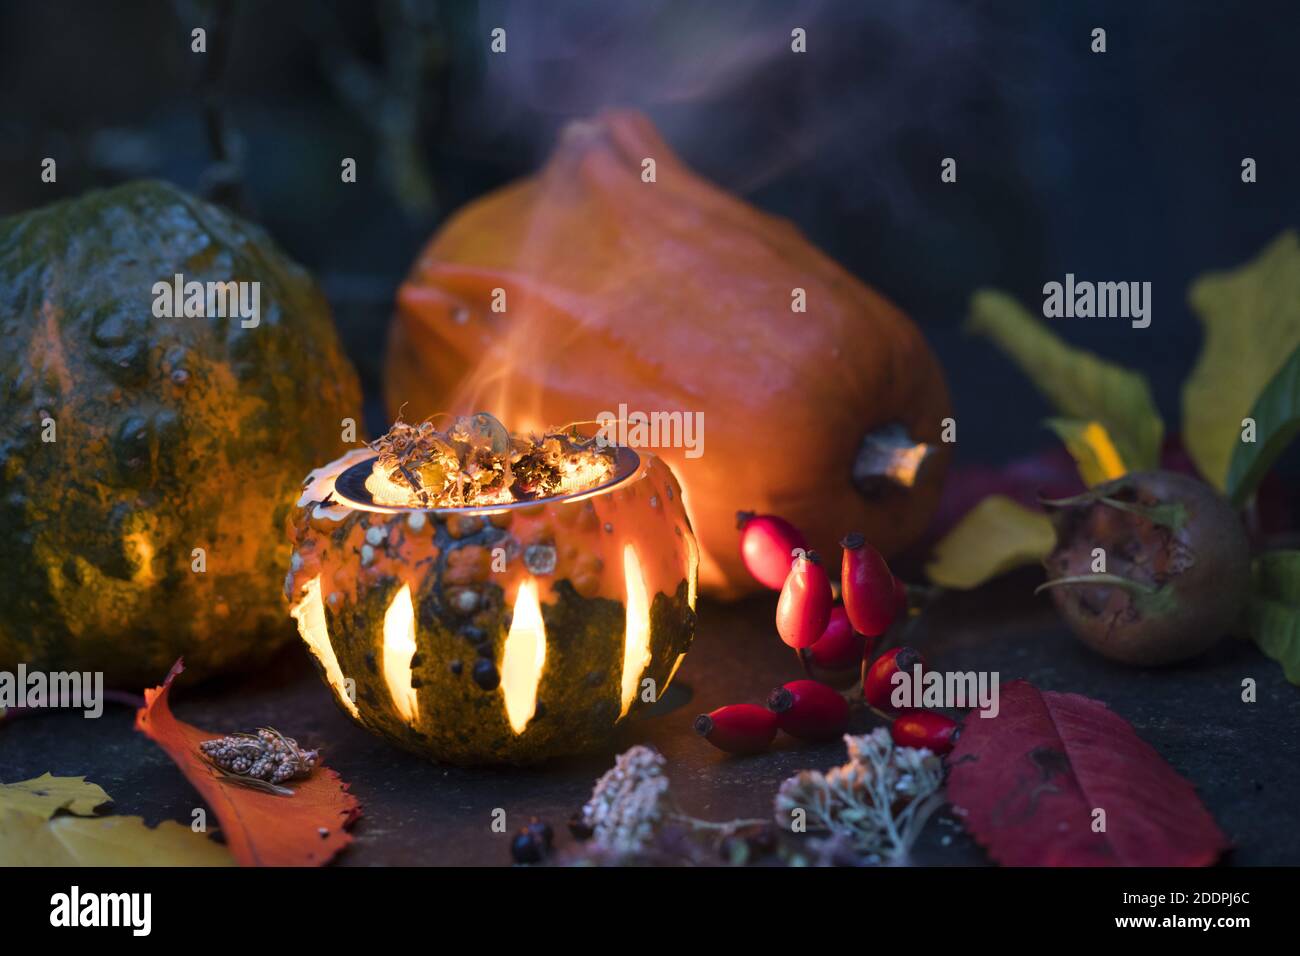 Smoking with aromatic herbs in a pumpkin with a tea light, Germany Stock Photo